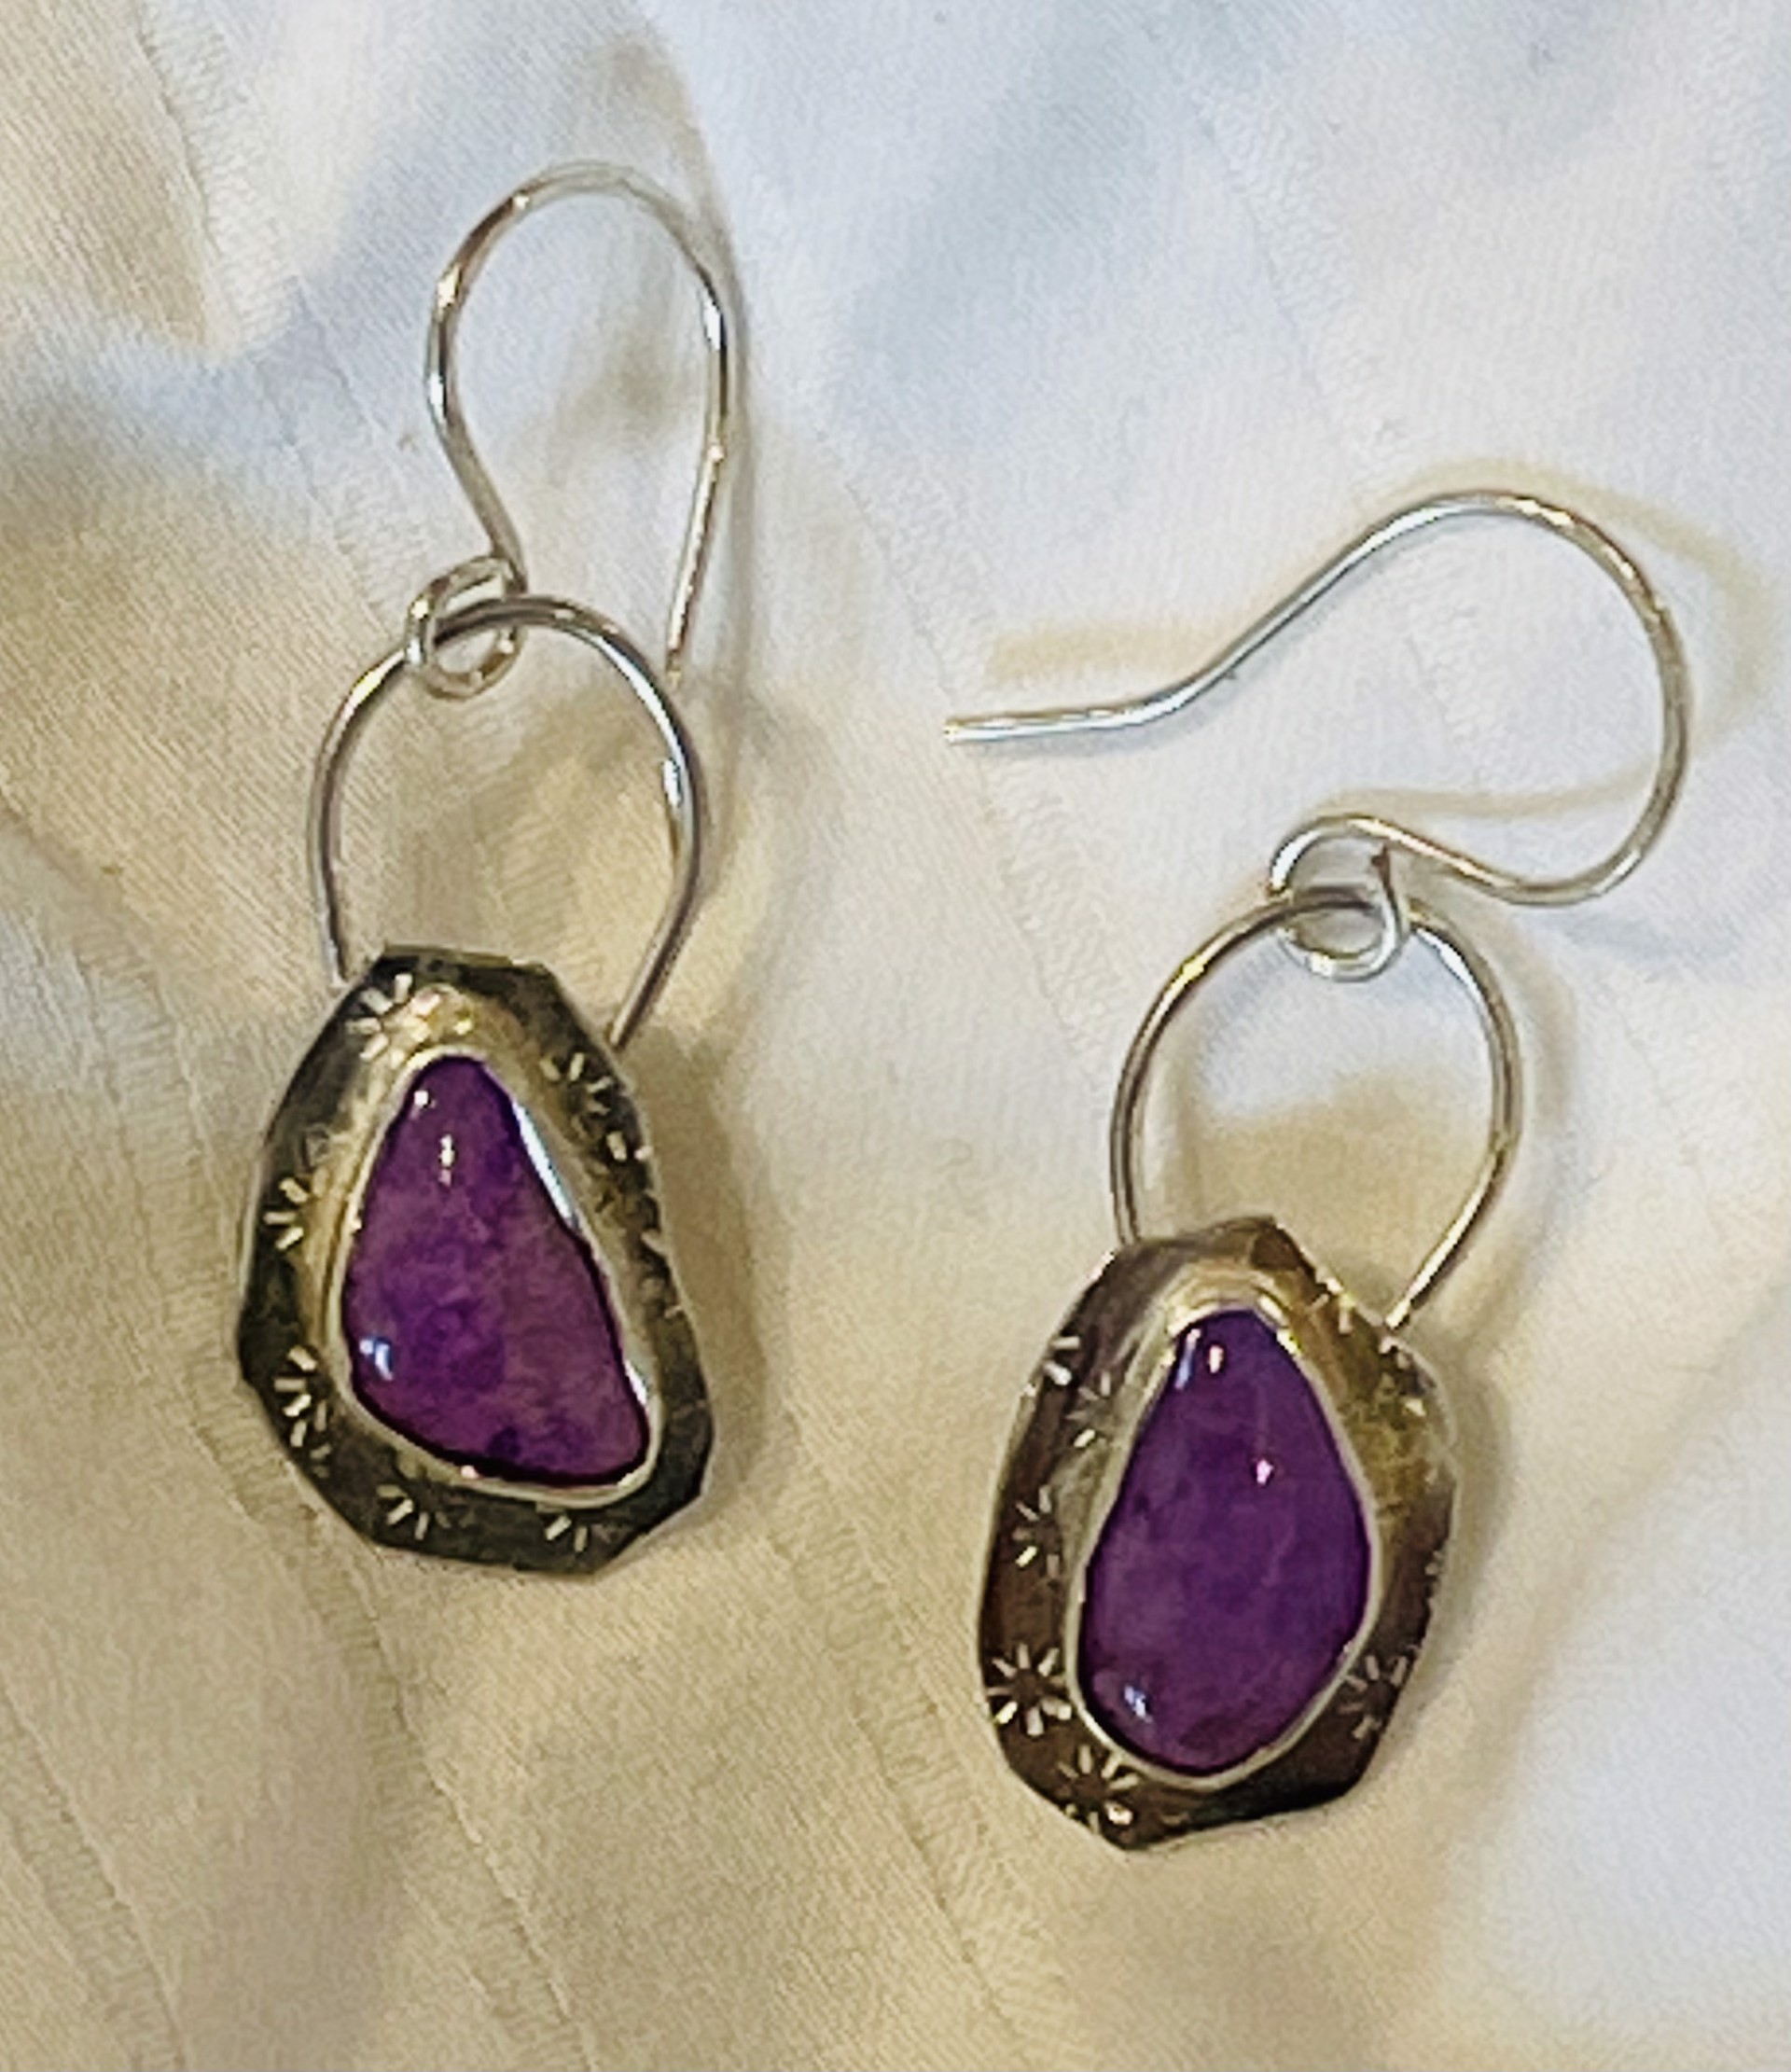 Earrings - Sterling Silver with Sugilite Cabochons DK2850 by Doris King